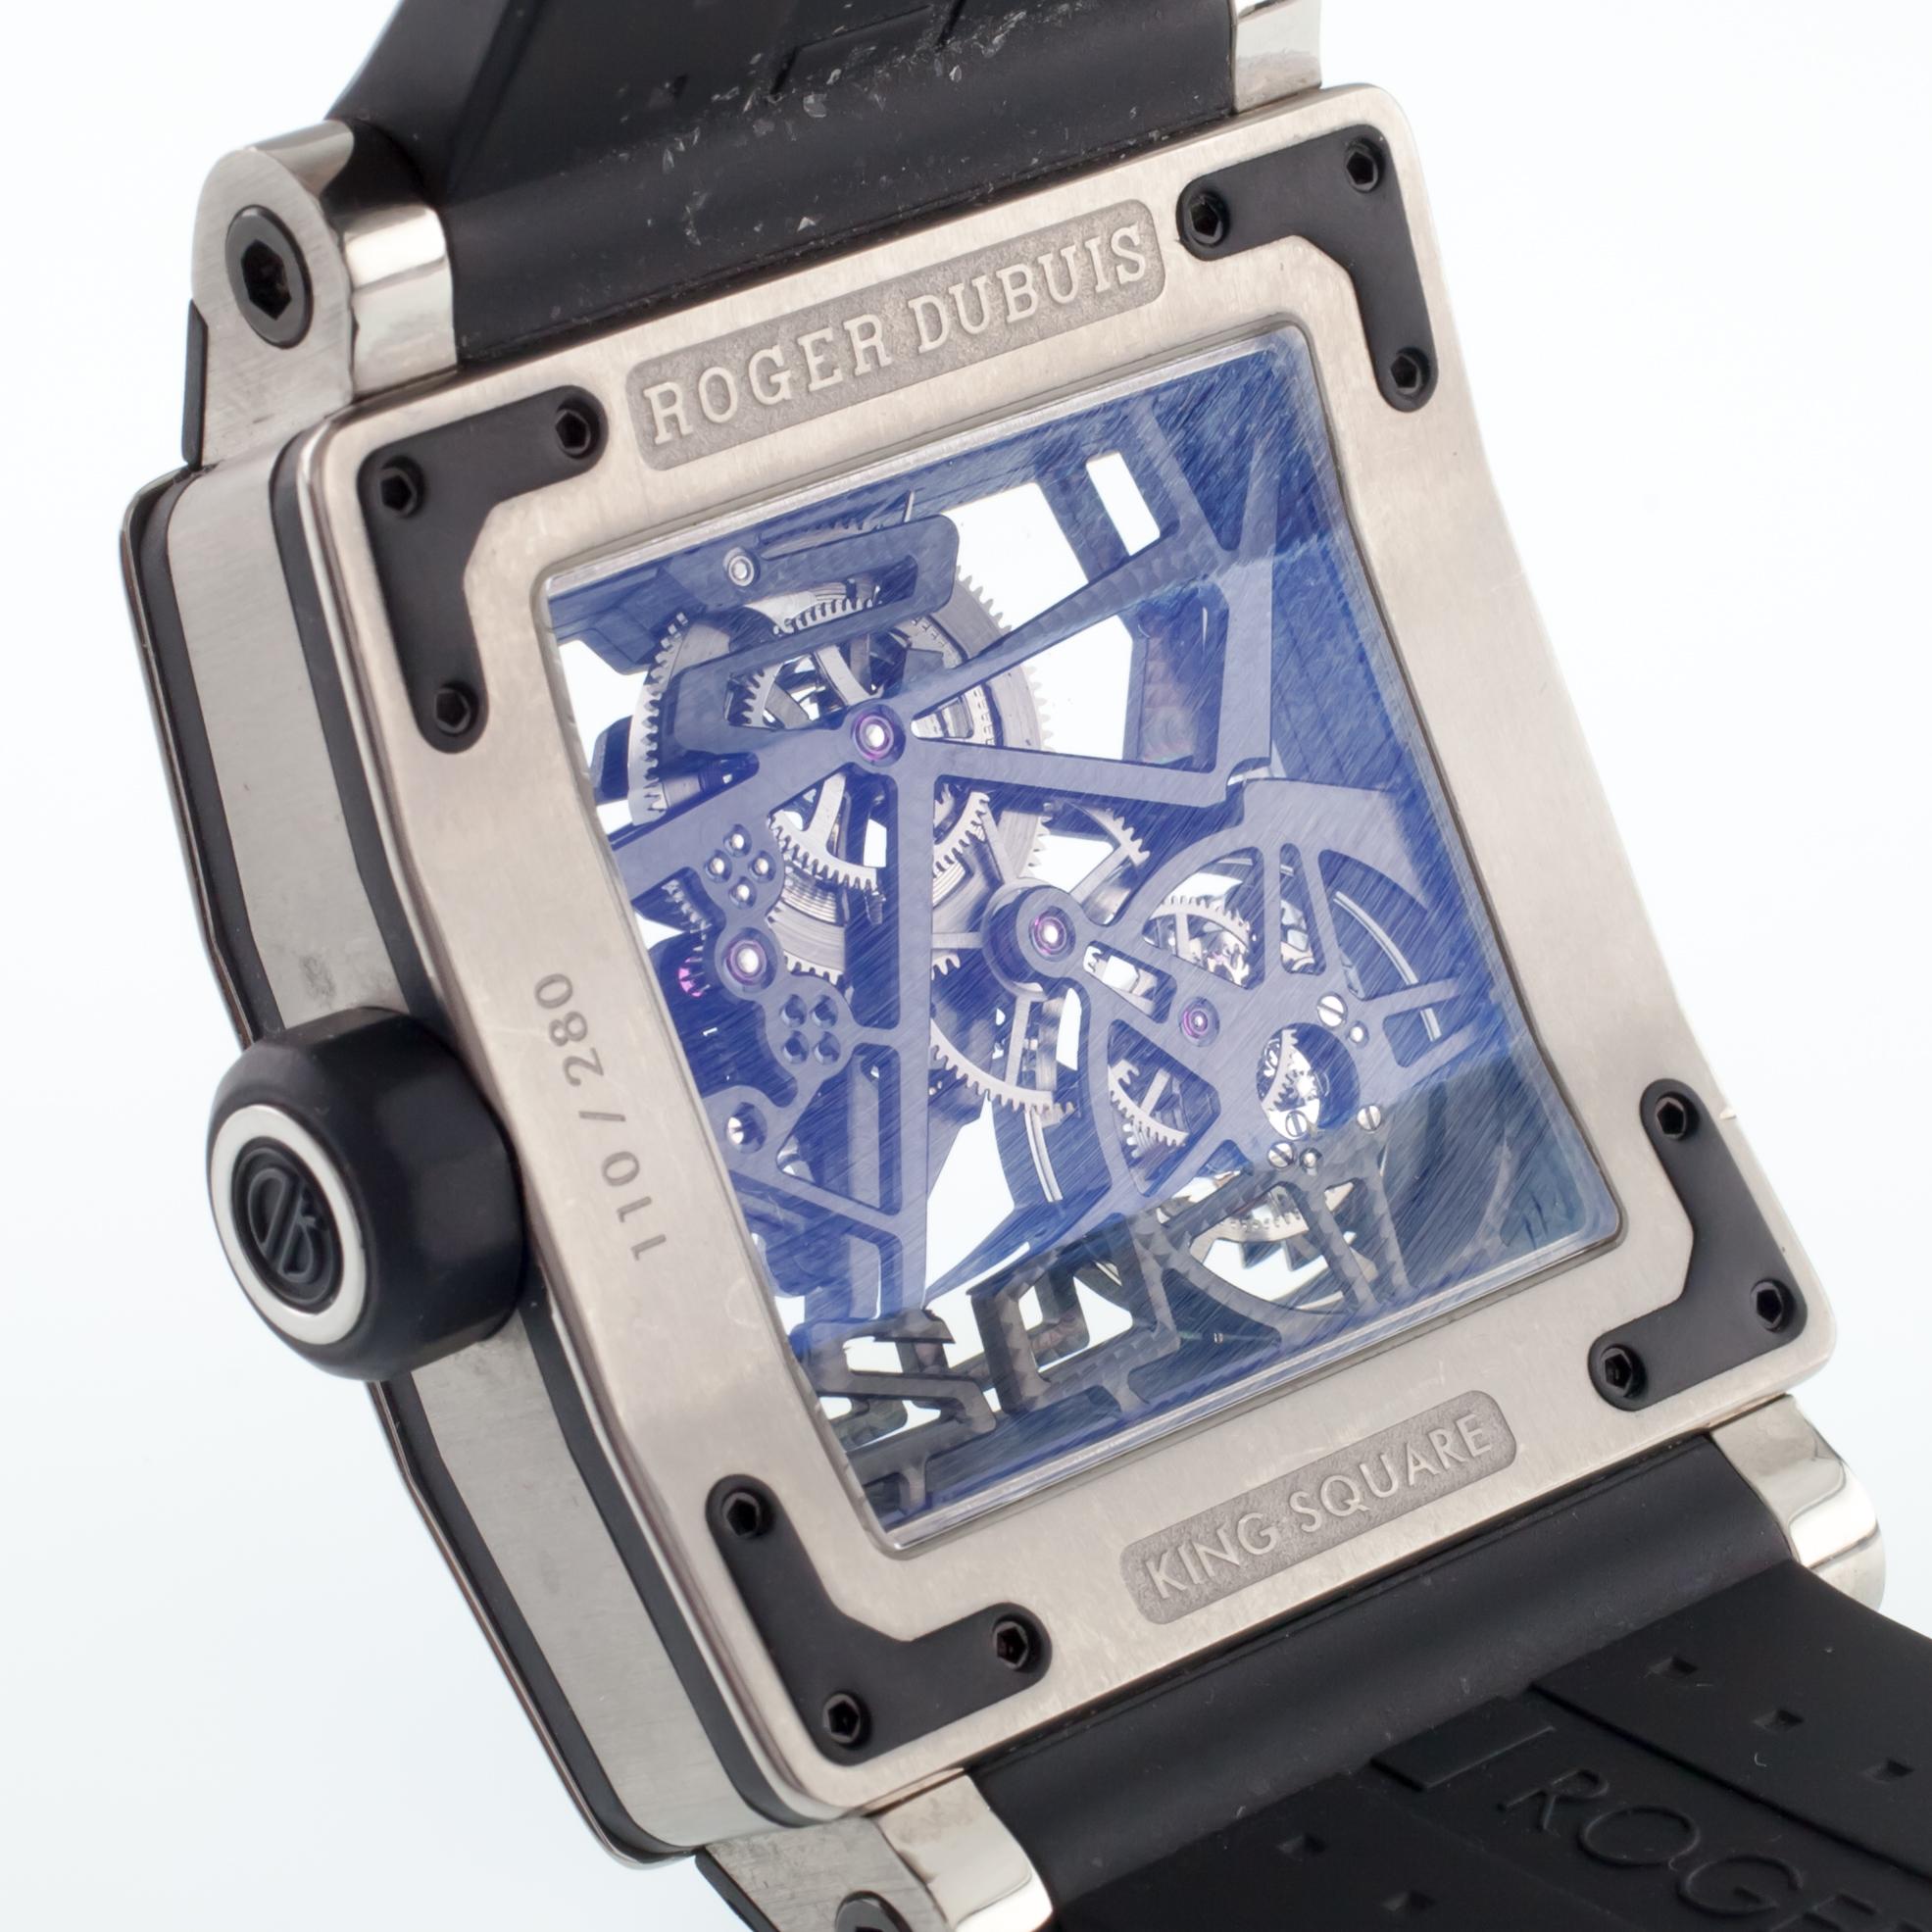 Roger Dubuis Titanium King Square Tourbillon Watch Limited Edition of 280 In Good Condition For Sale In Sherman Oaks, CA